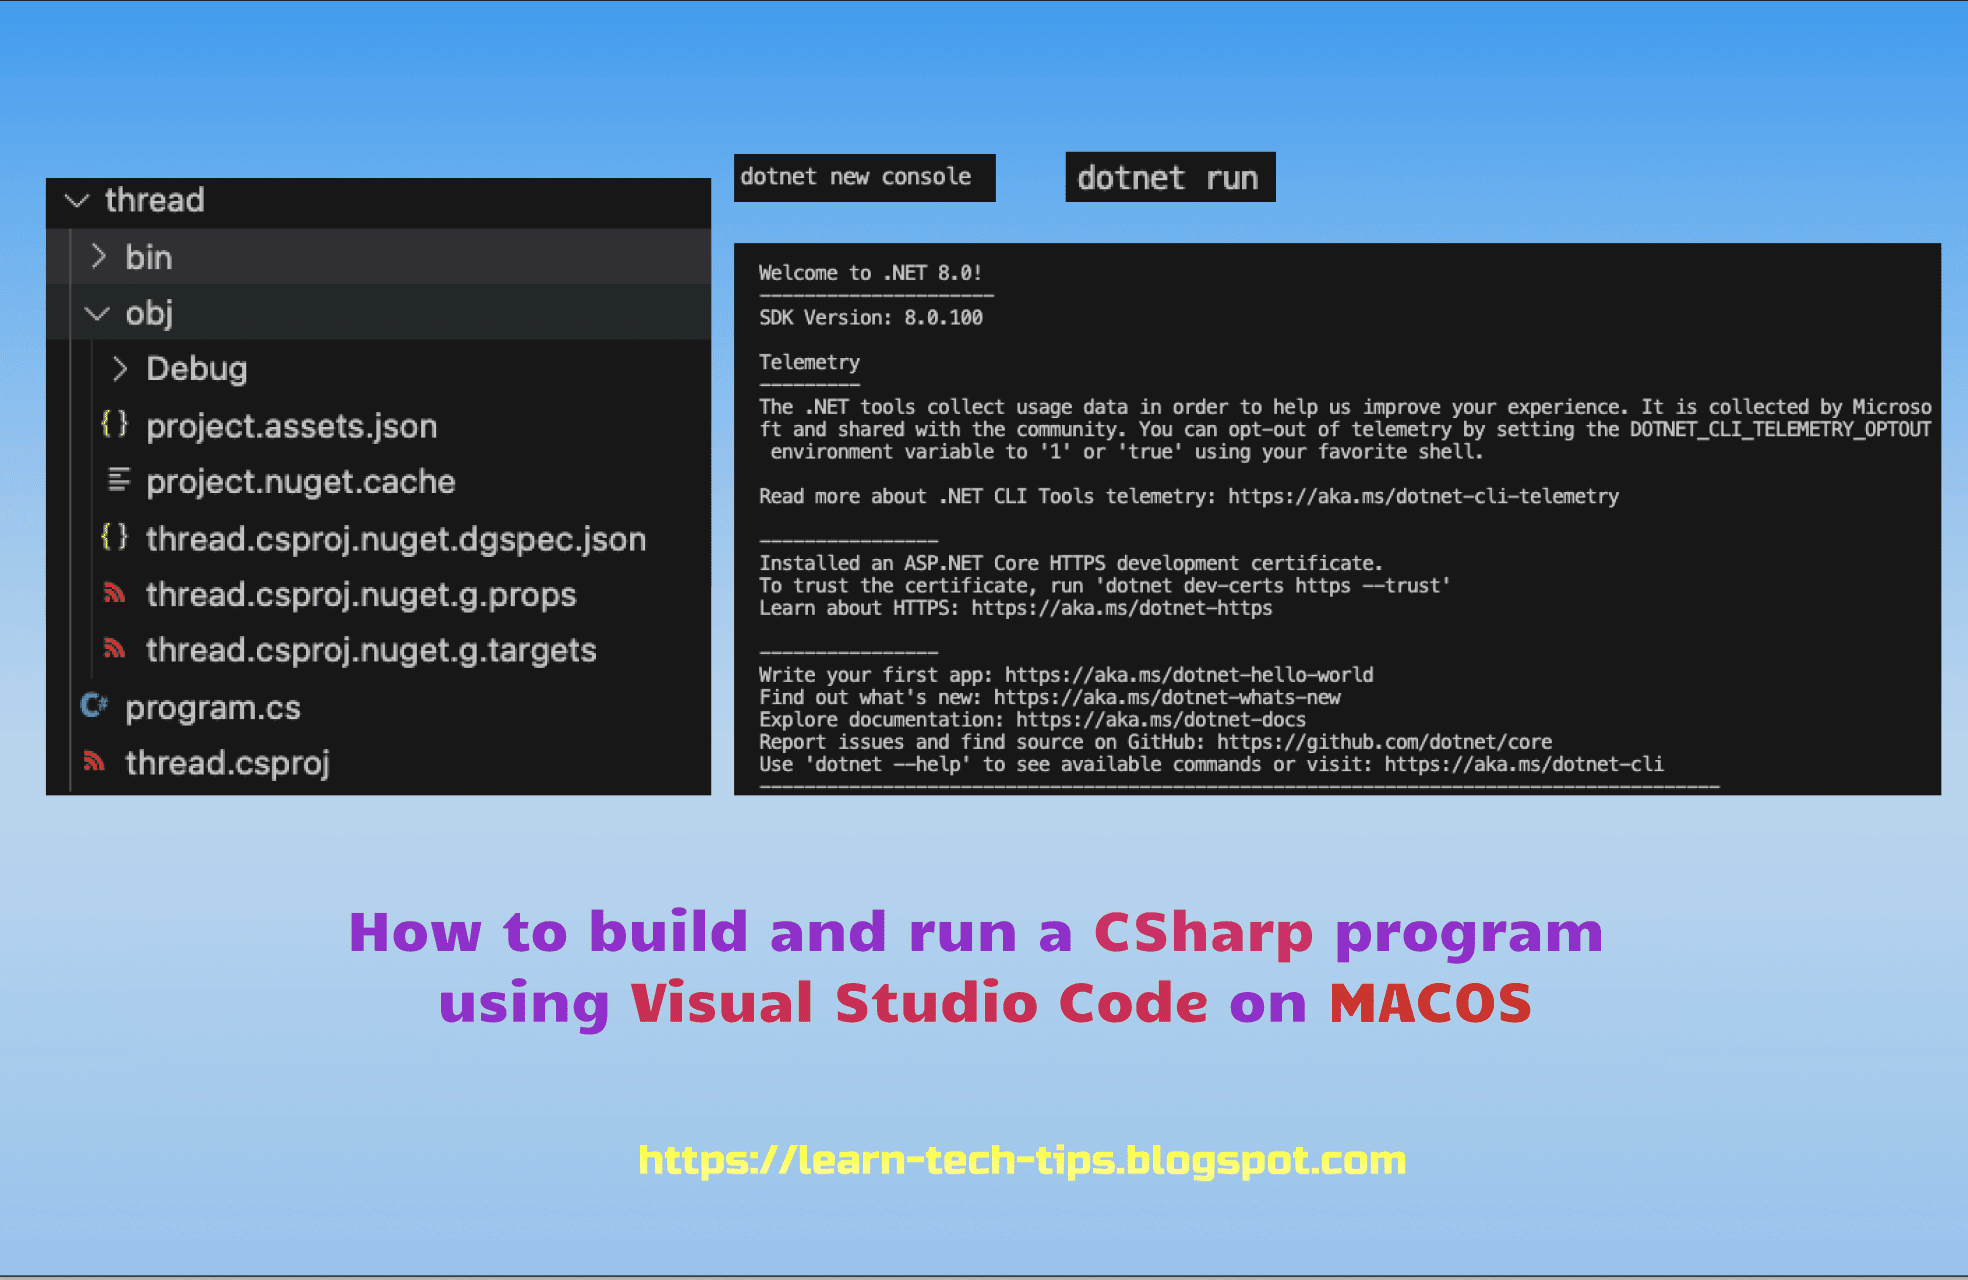 How to build and run a C# program using Visual Studio Code on MacOS